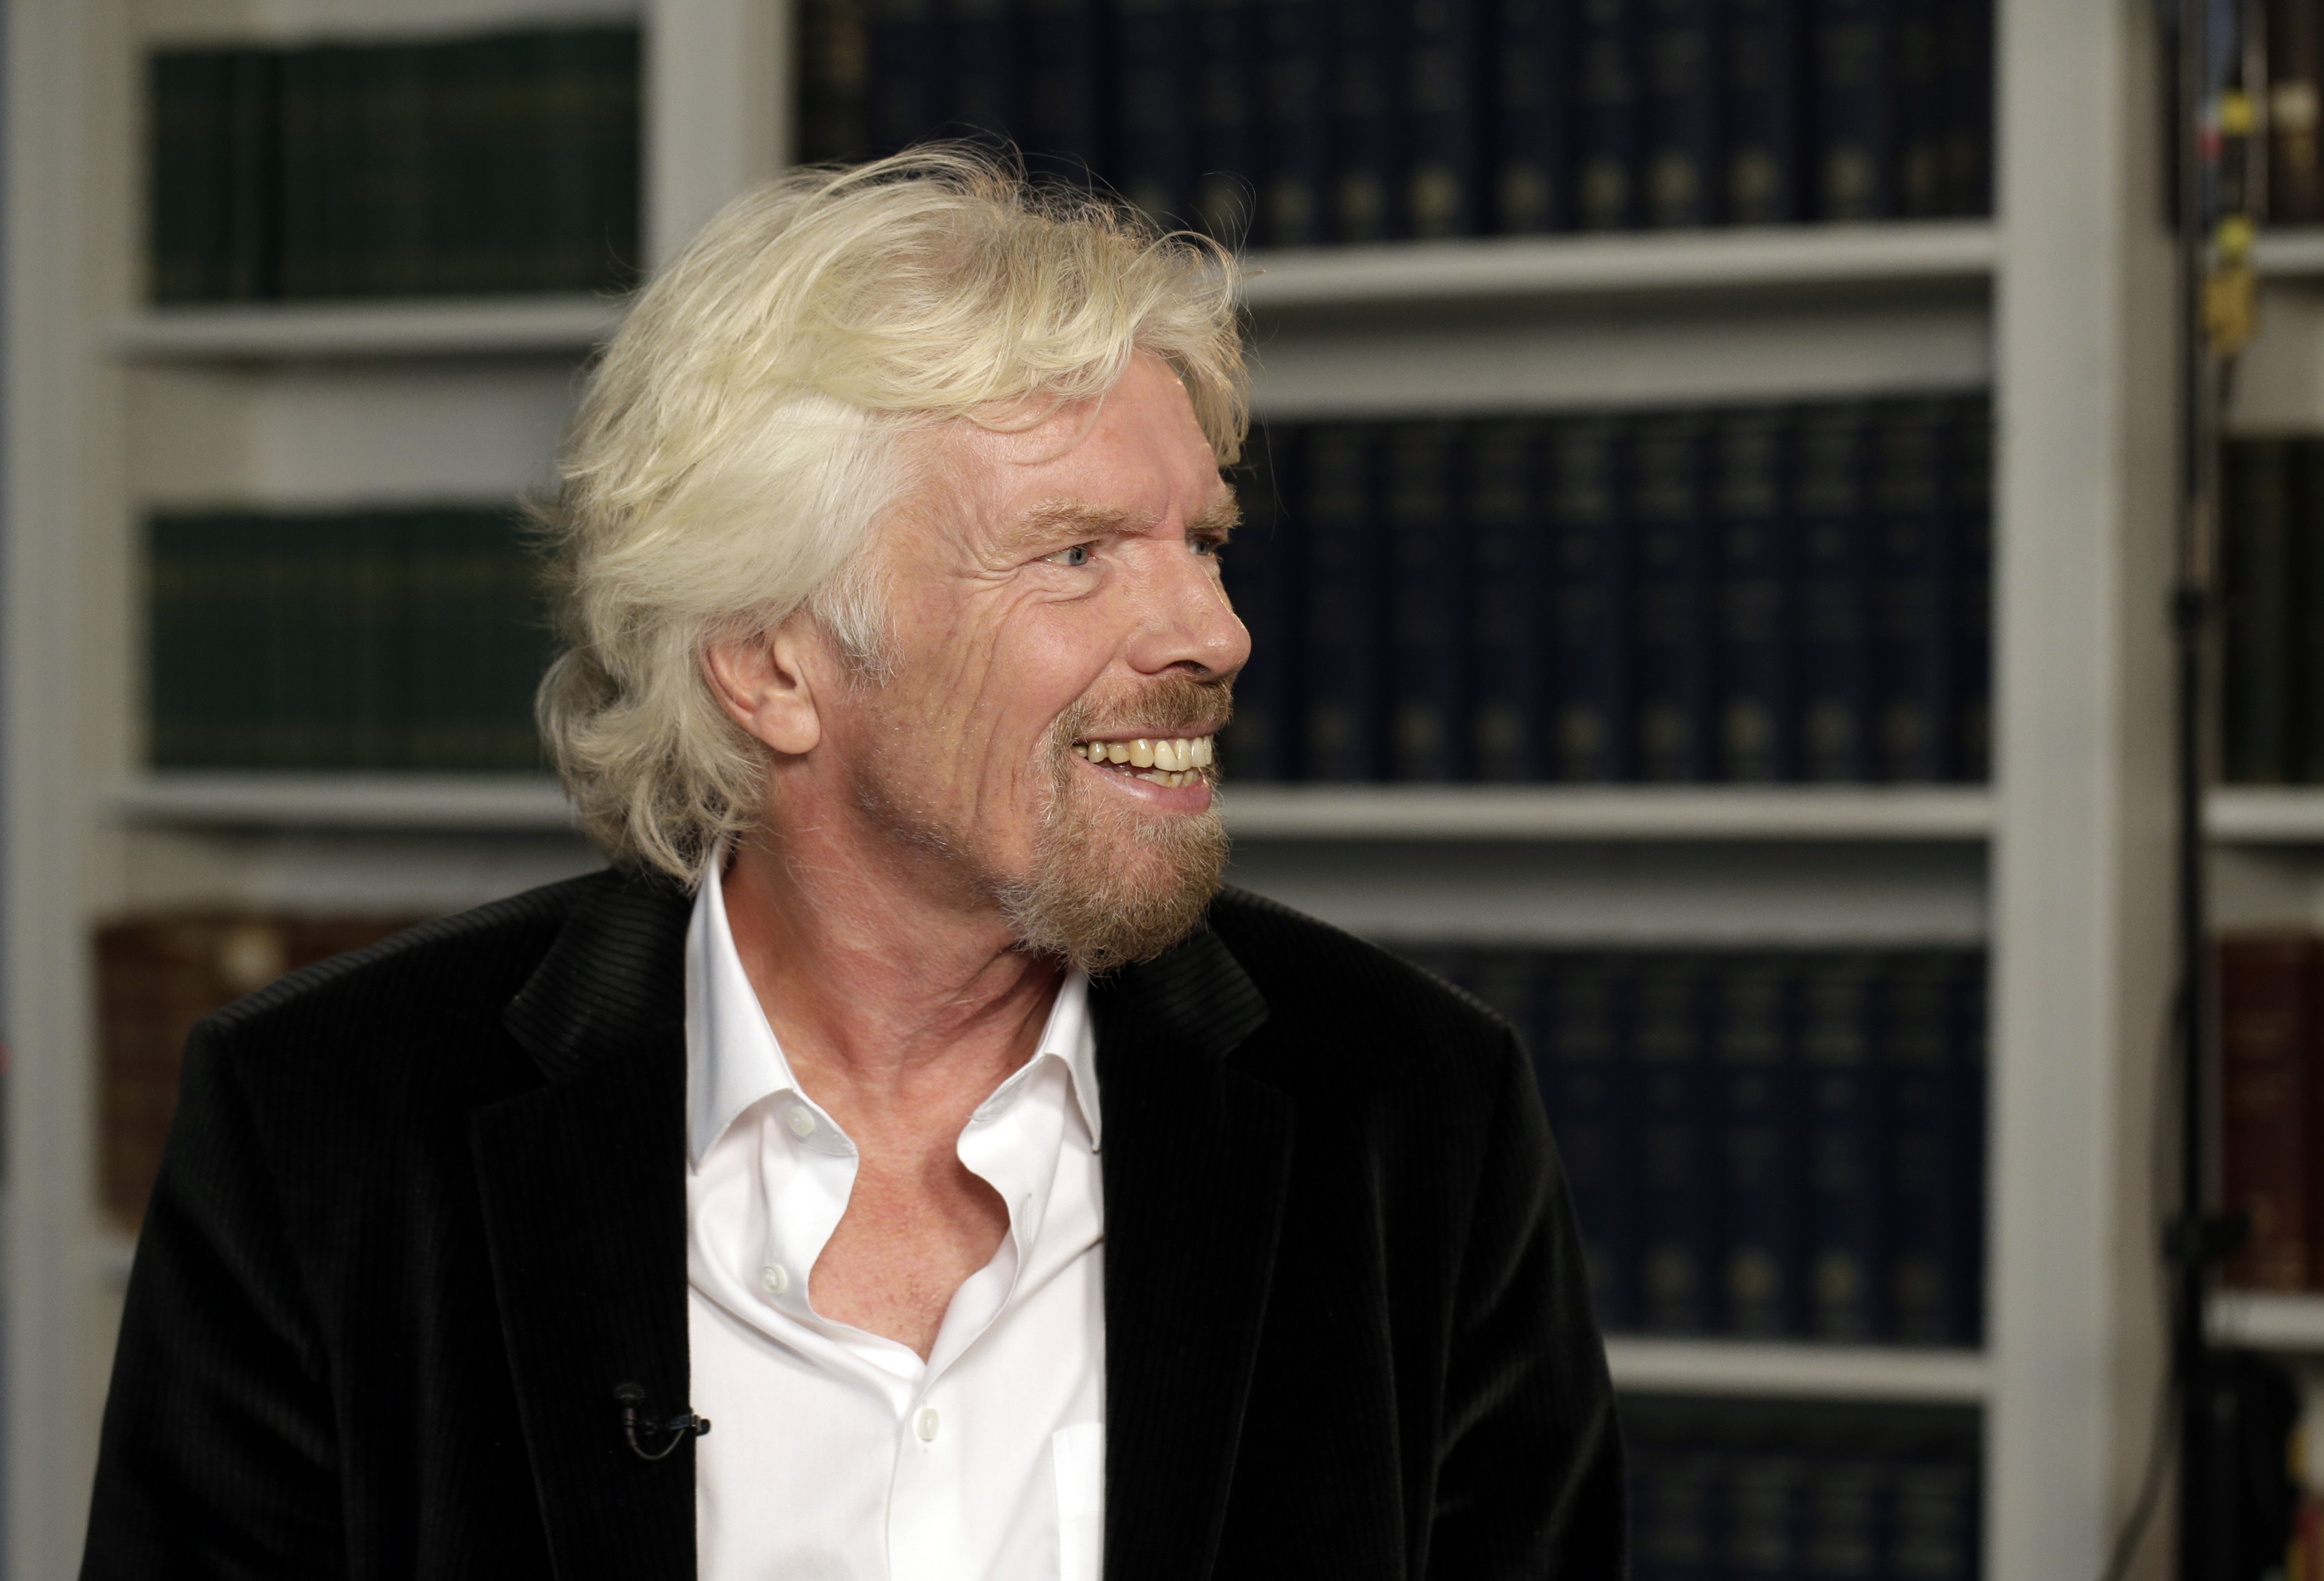 Richard Branson, founder of Virgin Group, during a Bloomberg Television interview in London, England on June 25, 2015. (Bloomberg/Getty Images)